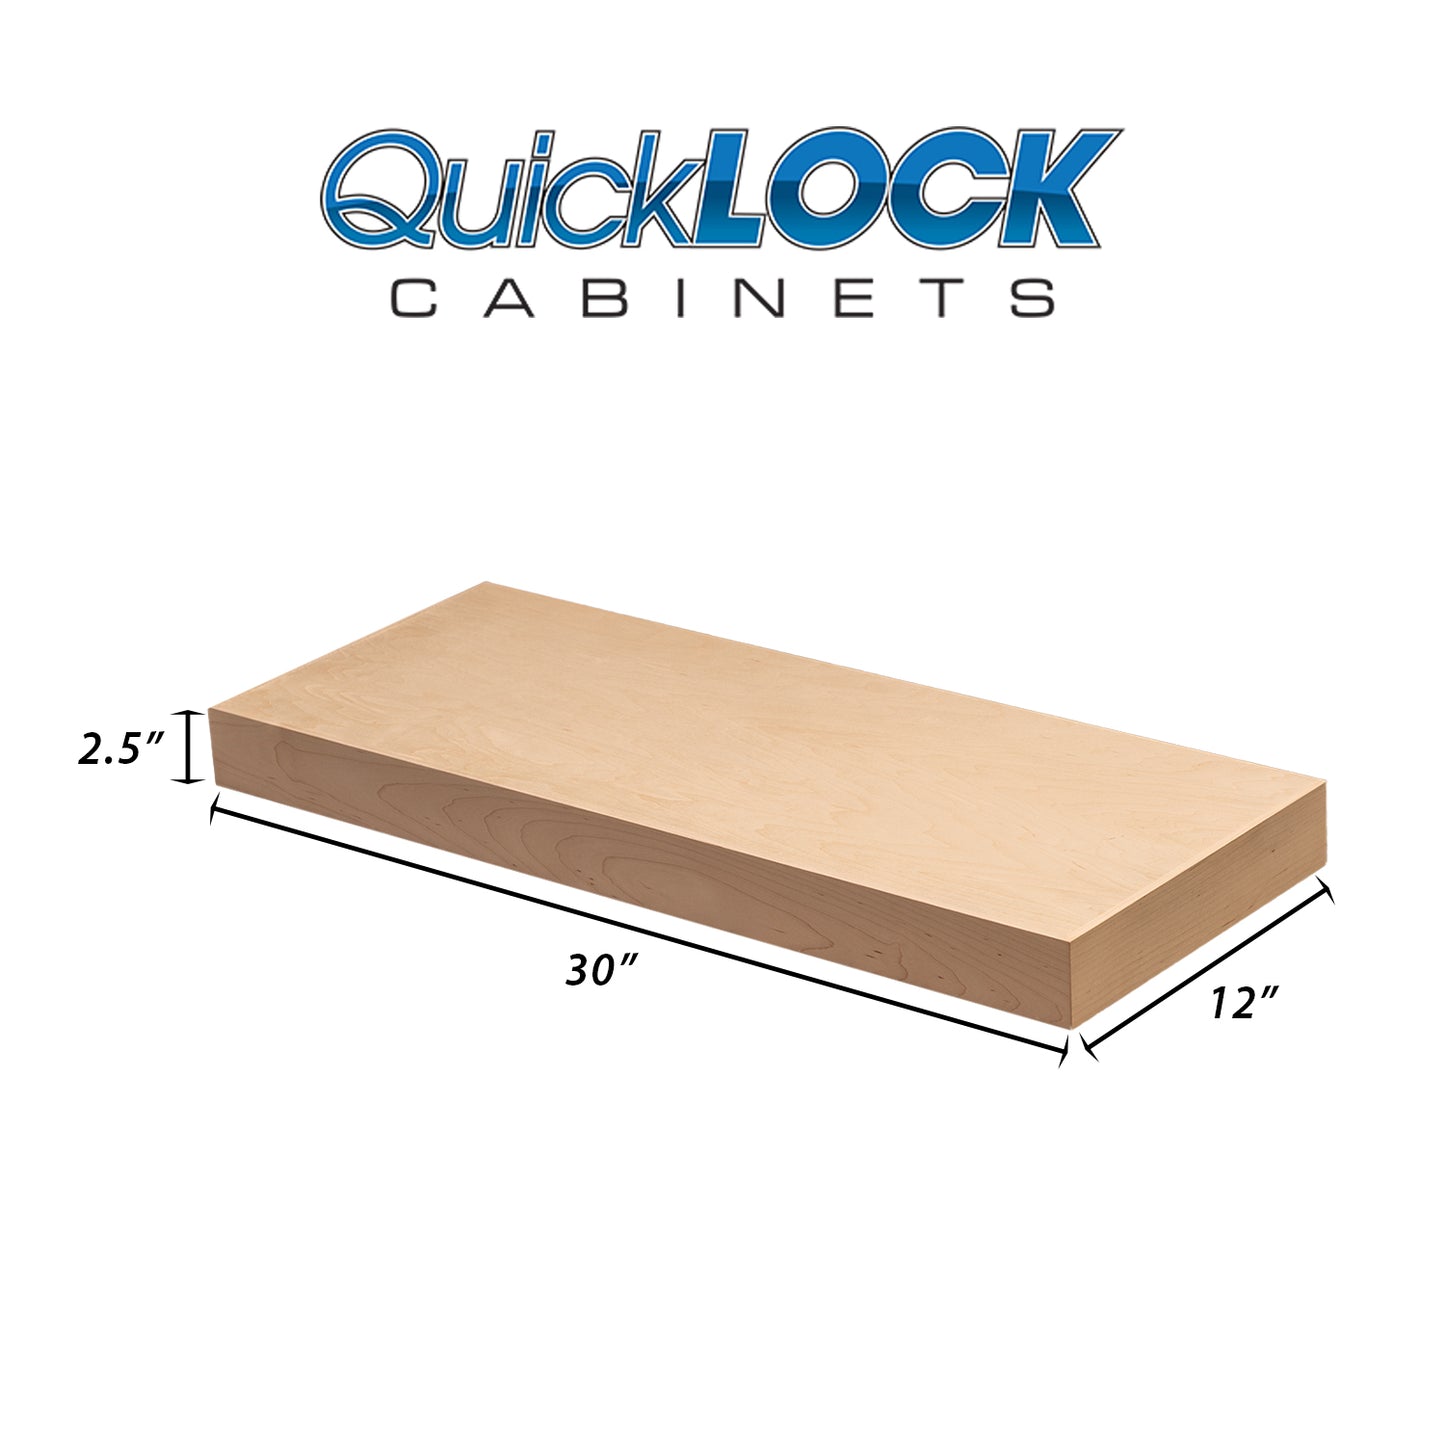 Quicklock Cabinets Floating Shelves | 2.5" Thick | Raw Maple, 12" D x 30" W x 2.5" H | American Made | Hardwood Bracket | Complete Shelf Unit